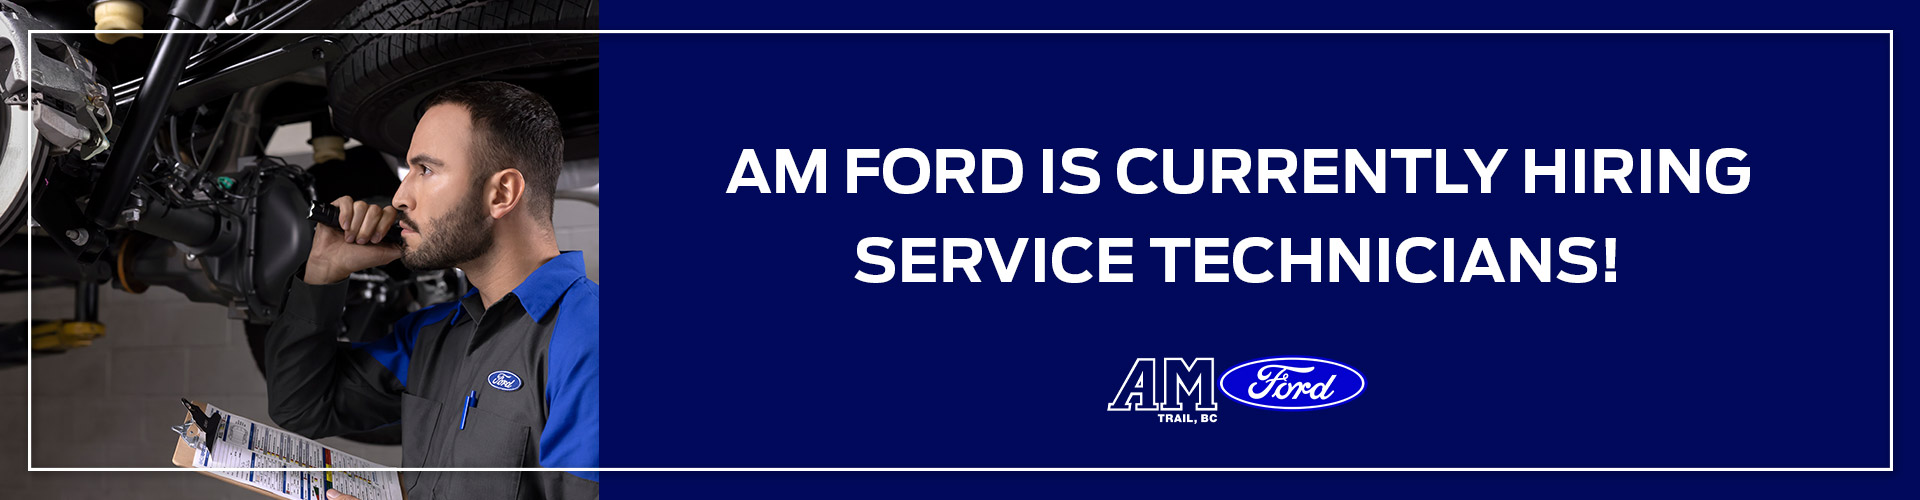 We're Hiring Service Technicians | AM Ford | Trail, BC